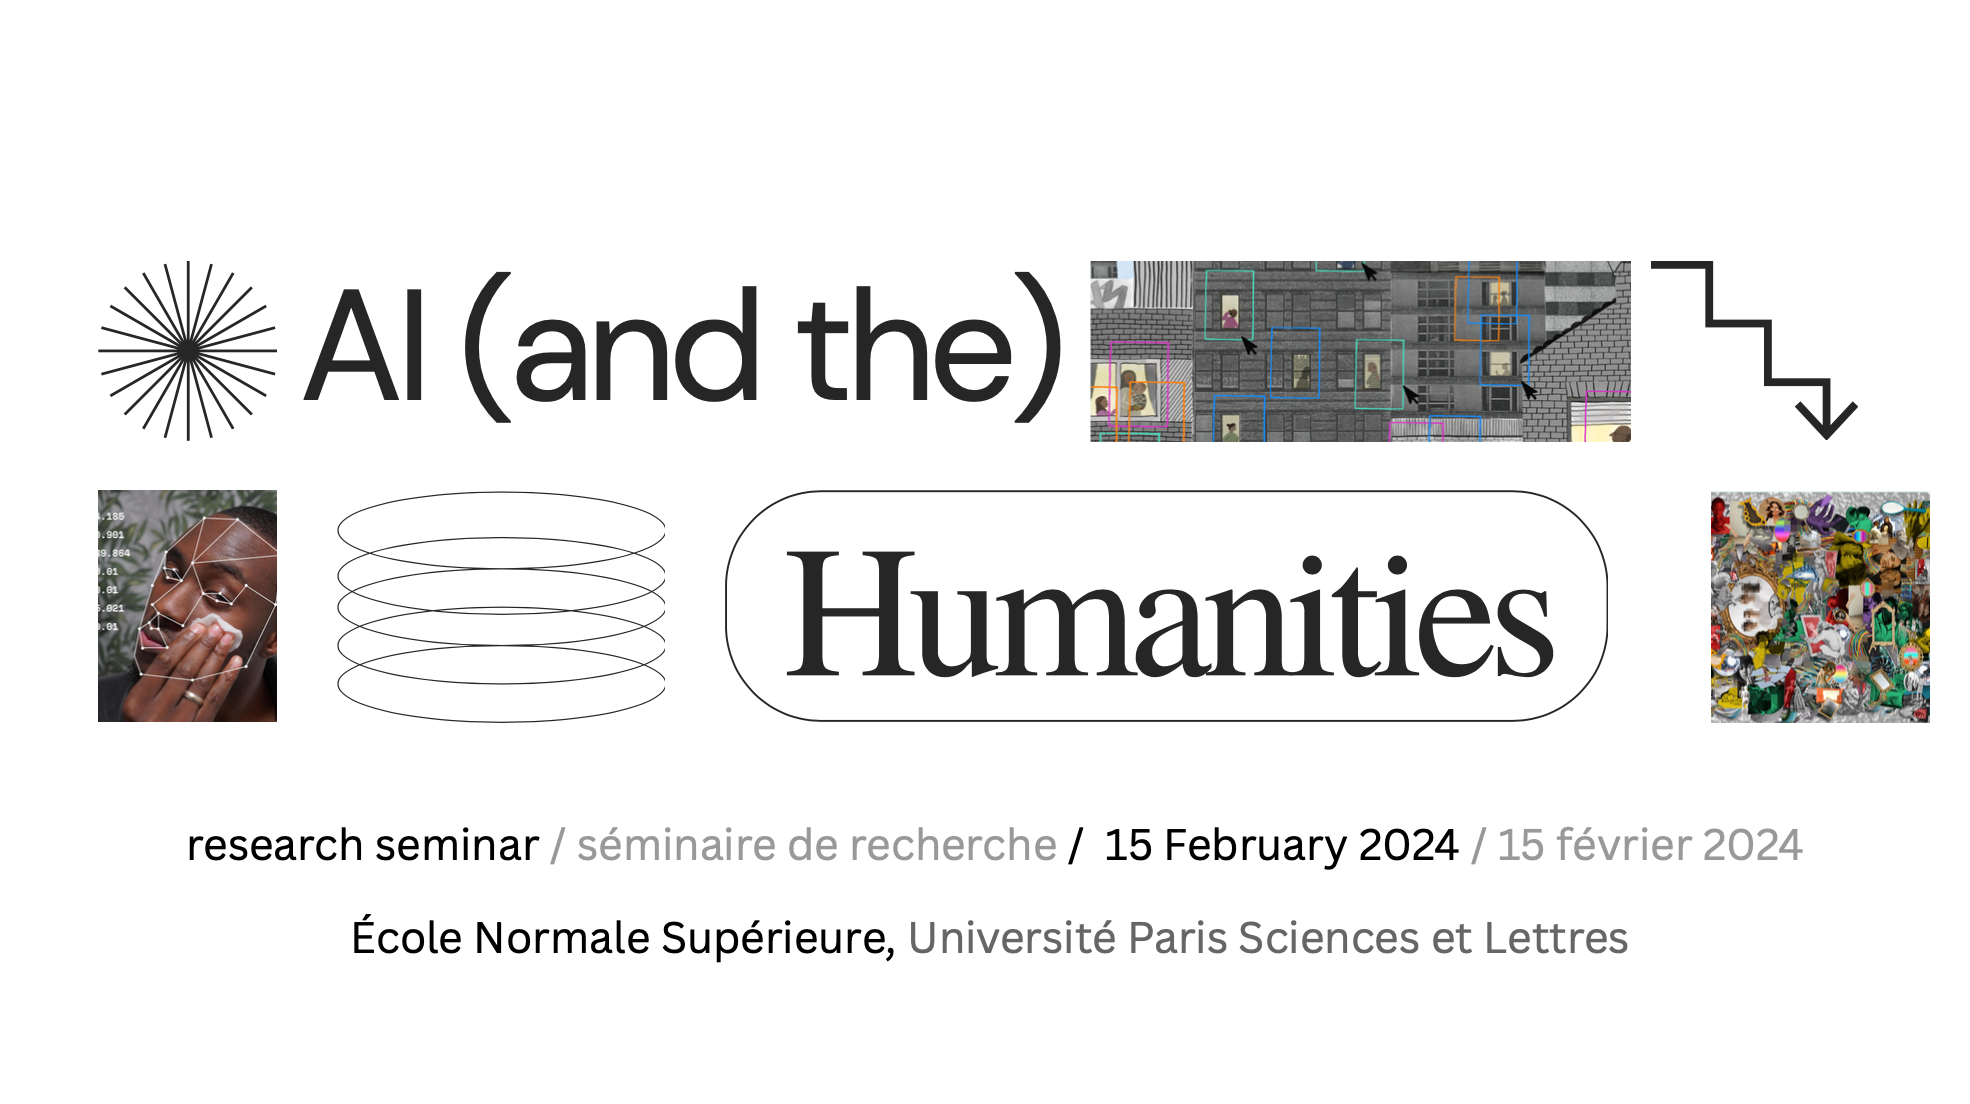 AI and the humanities event